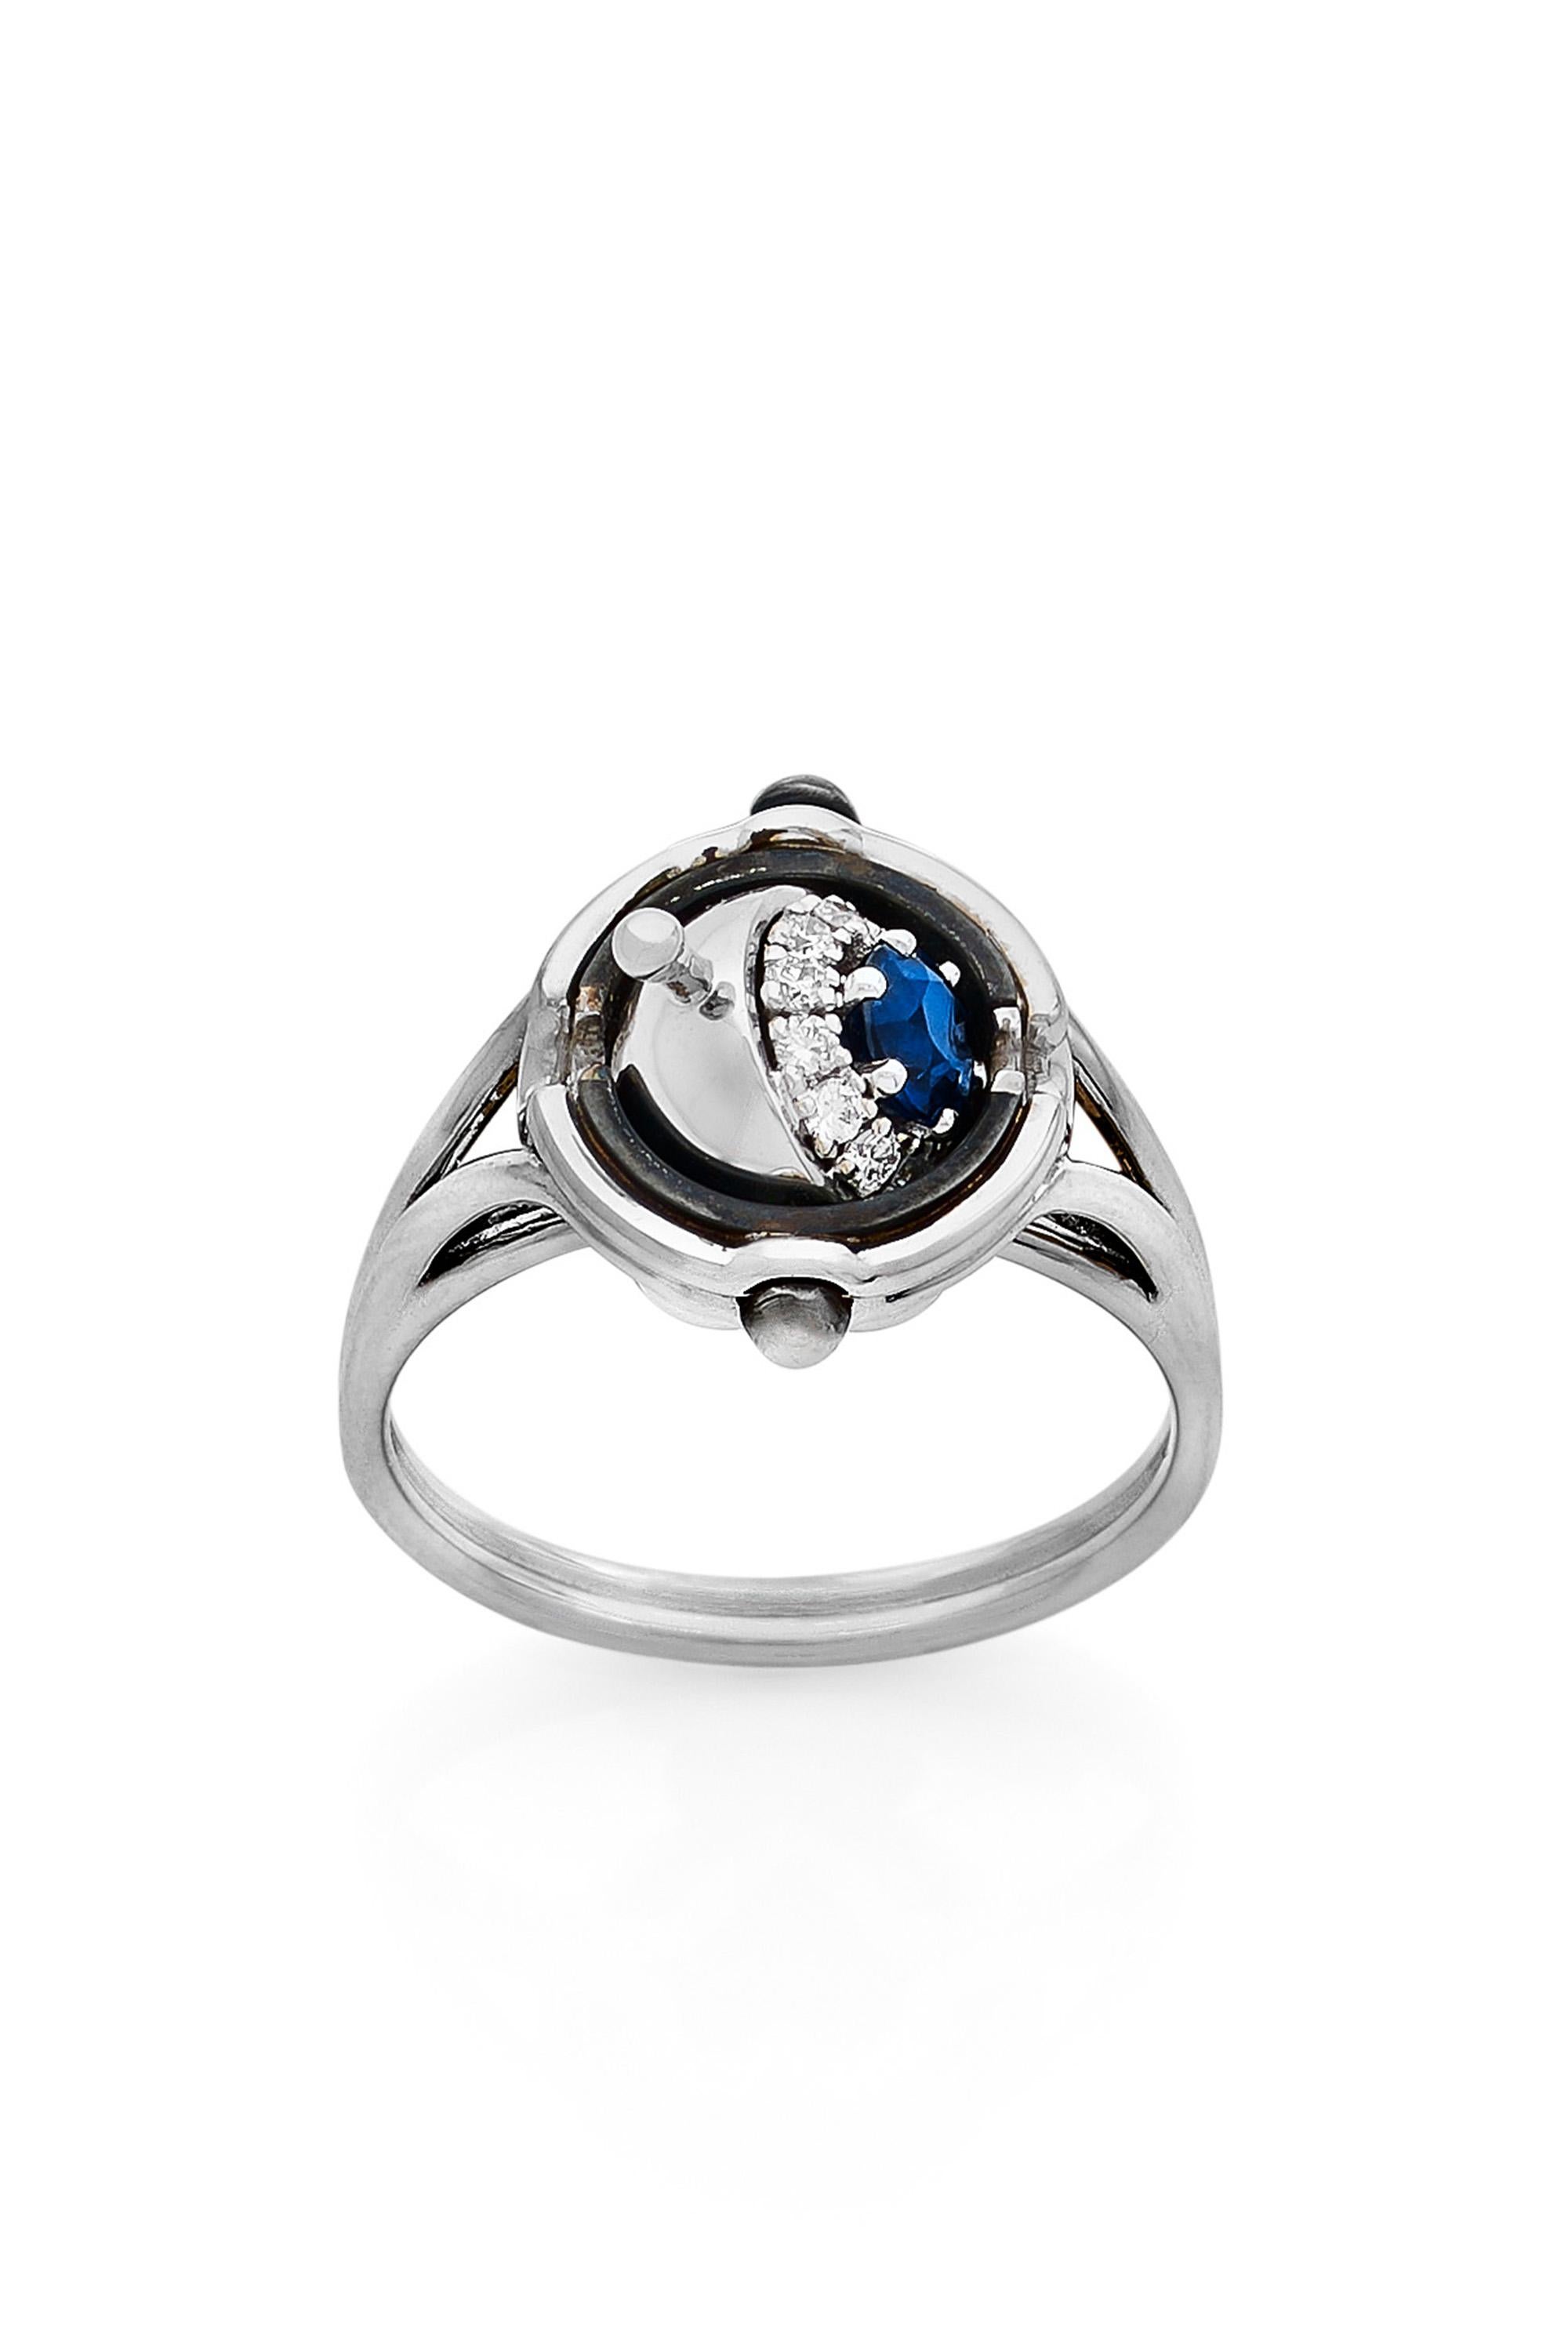 White gold and distressed silver ring. Rotating sphere revealing a sapphire surrounded by diamonds.

Details:
Sapphire: 0.30 cts, ø 4mm
12 Diamonds: 0.15 cts
18k White Gold: 5 g
Distressed Silver: 1.5 g
Made in France